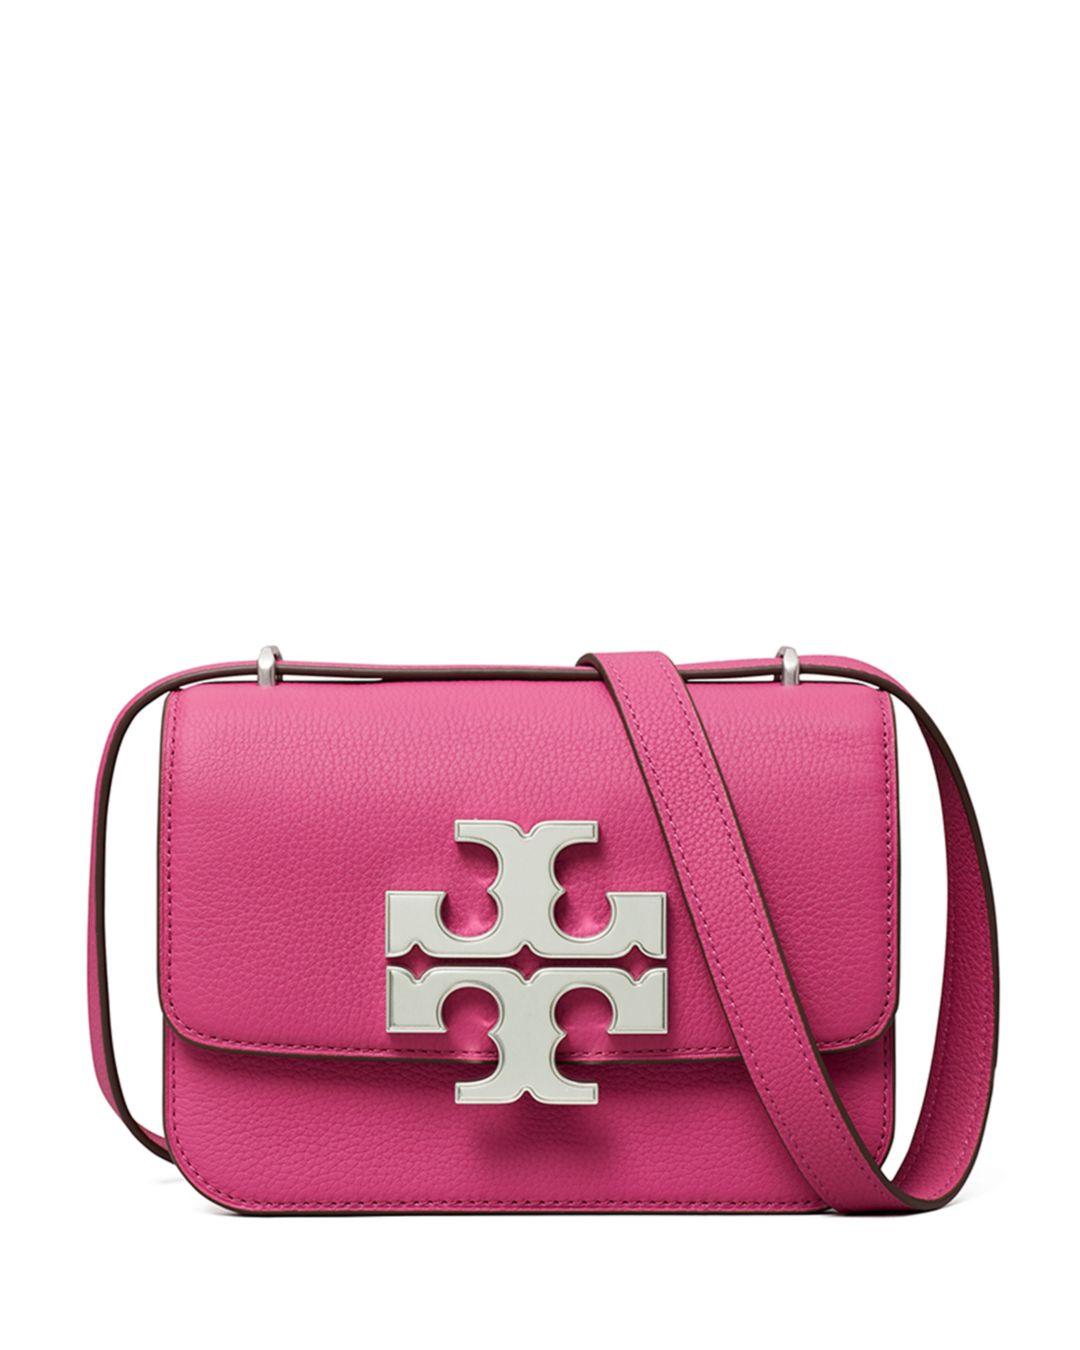 Tory Burch Eleanor Small Convertible Shoulder Bag in Pink | Lyst